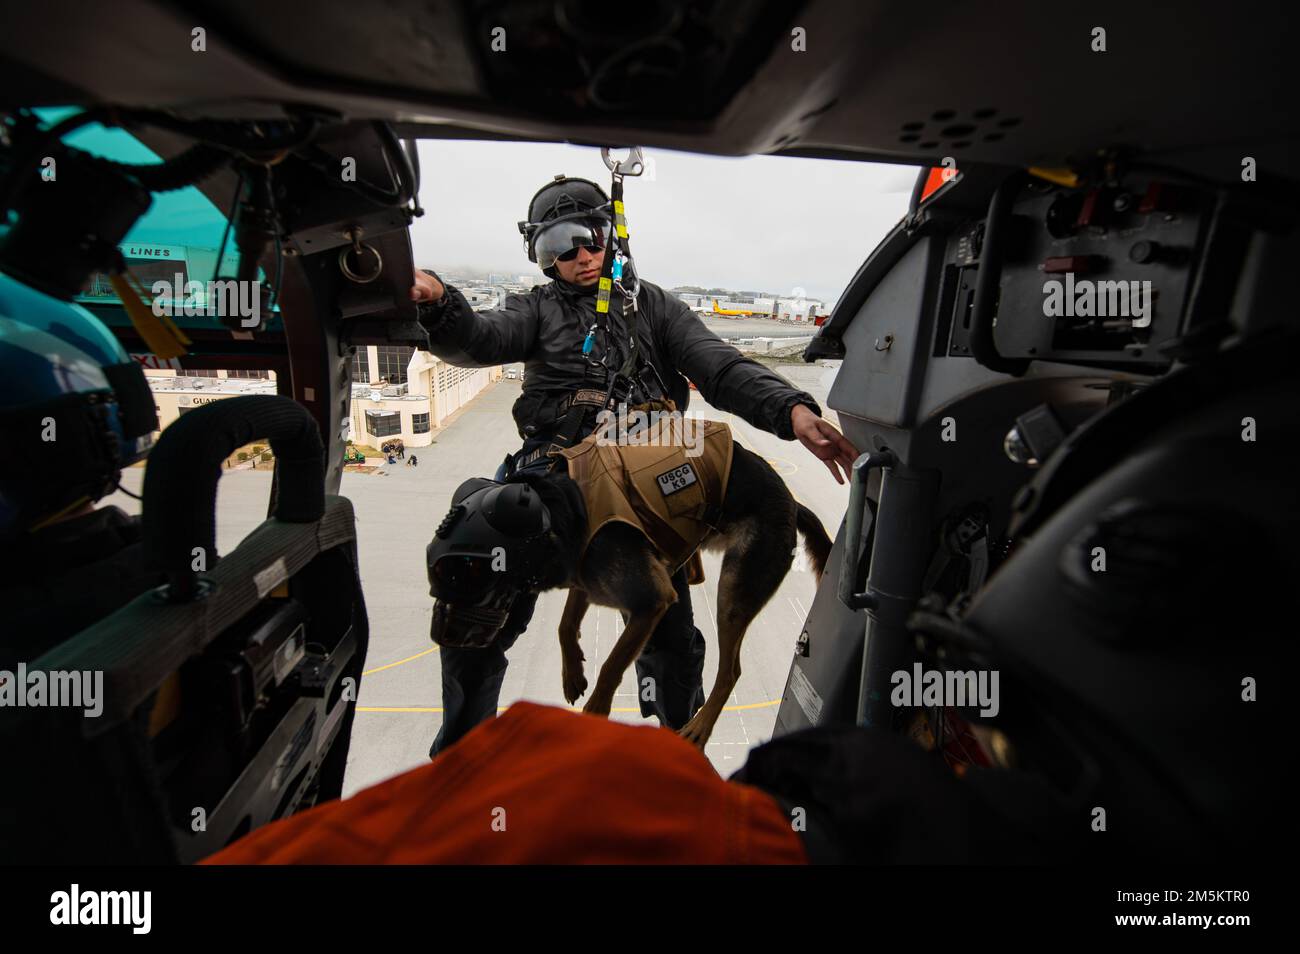 Coast Guard K-9 Petty Officer 1st Class Beny and his handler Maritime Enforcement Specialist 2nd Class Glen Klotz perform K-9 hoisting training in a MH-65D Dolphin helicopter at Coast Guard Air Station San Francsico, California on March 23, 2022. This is K-9 Beny’s initial qualification for K9 hoisting. (Coast Guard photo by Petty Officer 3rd Class Alex Gray) Stock Photo